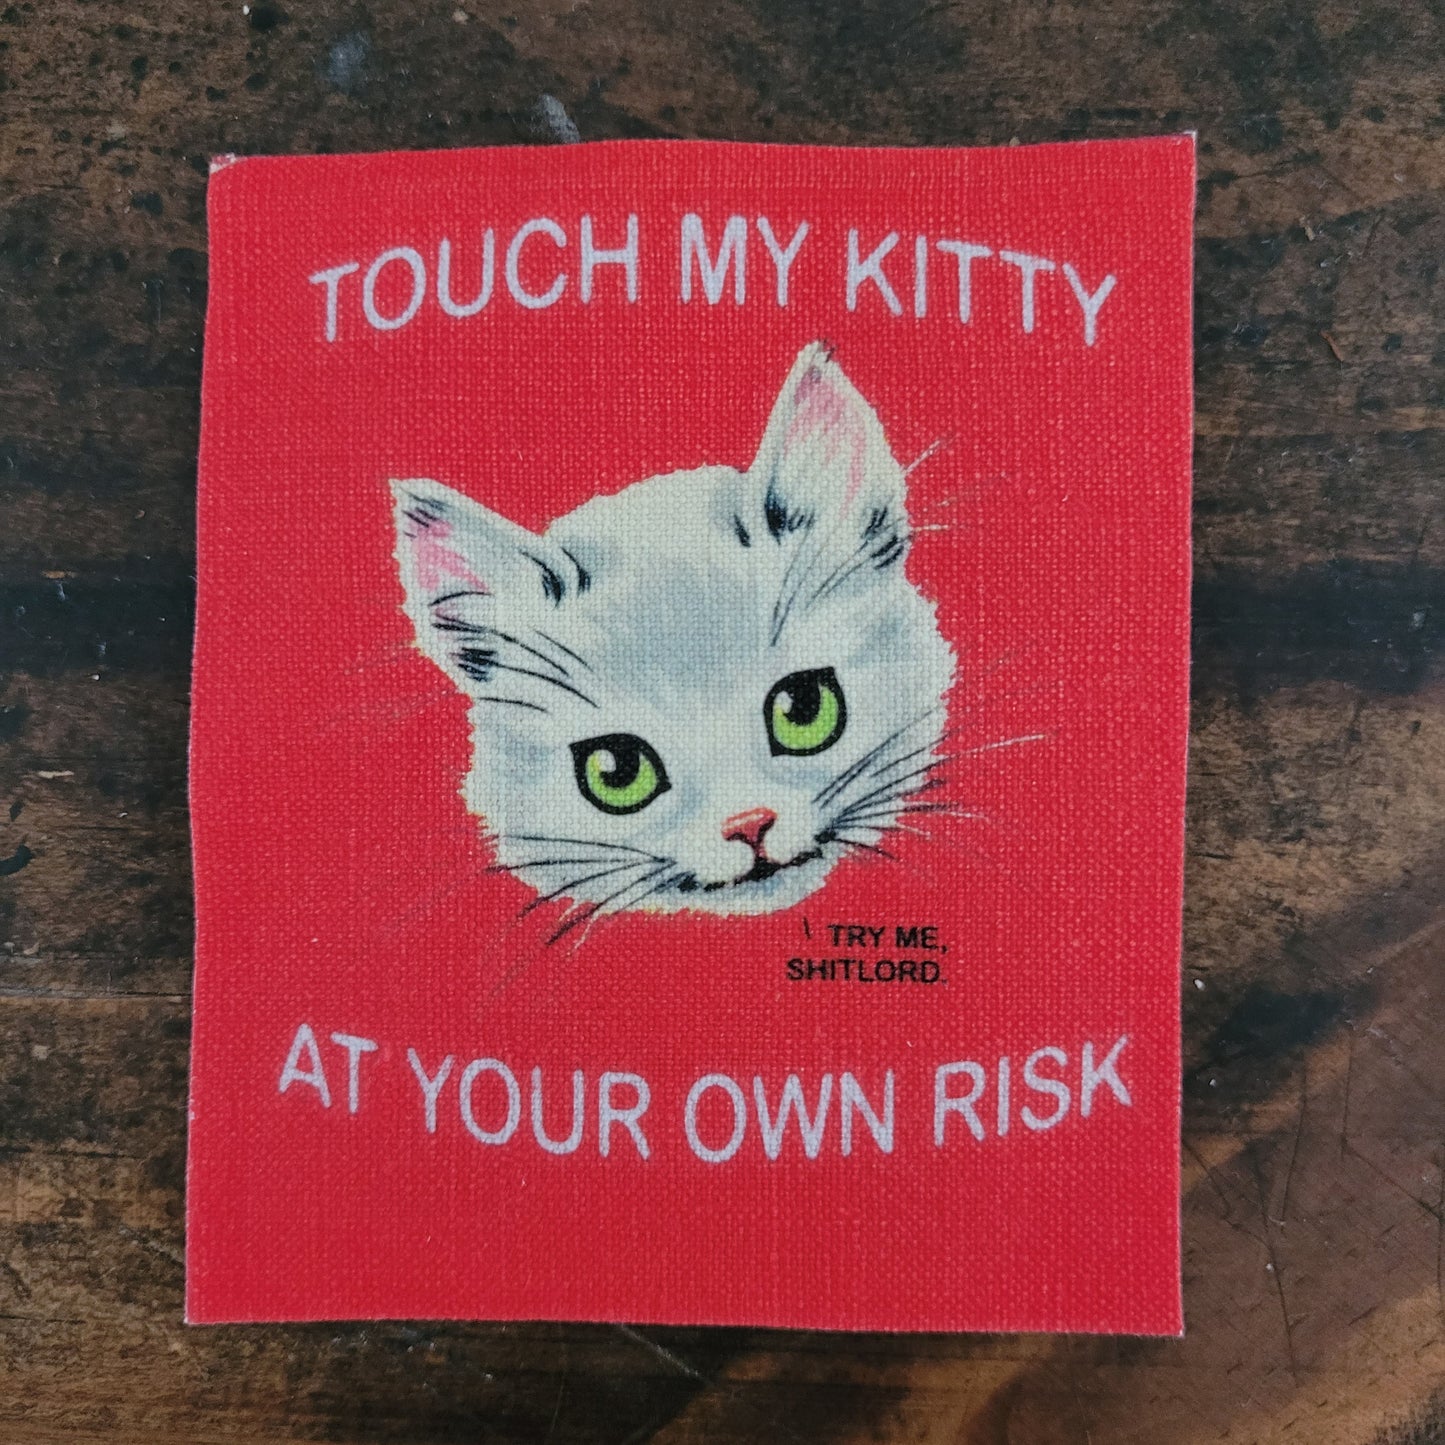 Backpatch "Touch my Kitty at your own risk"